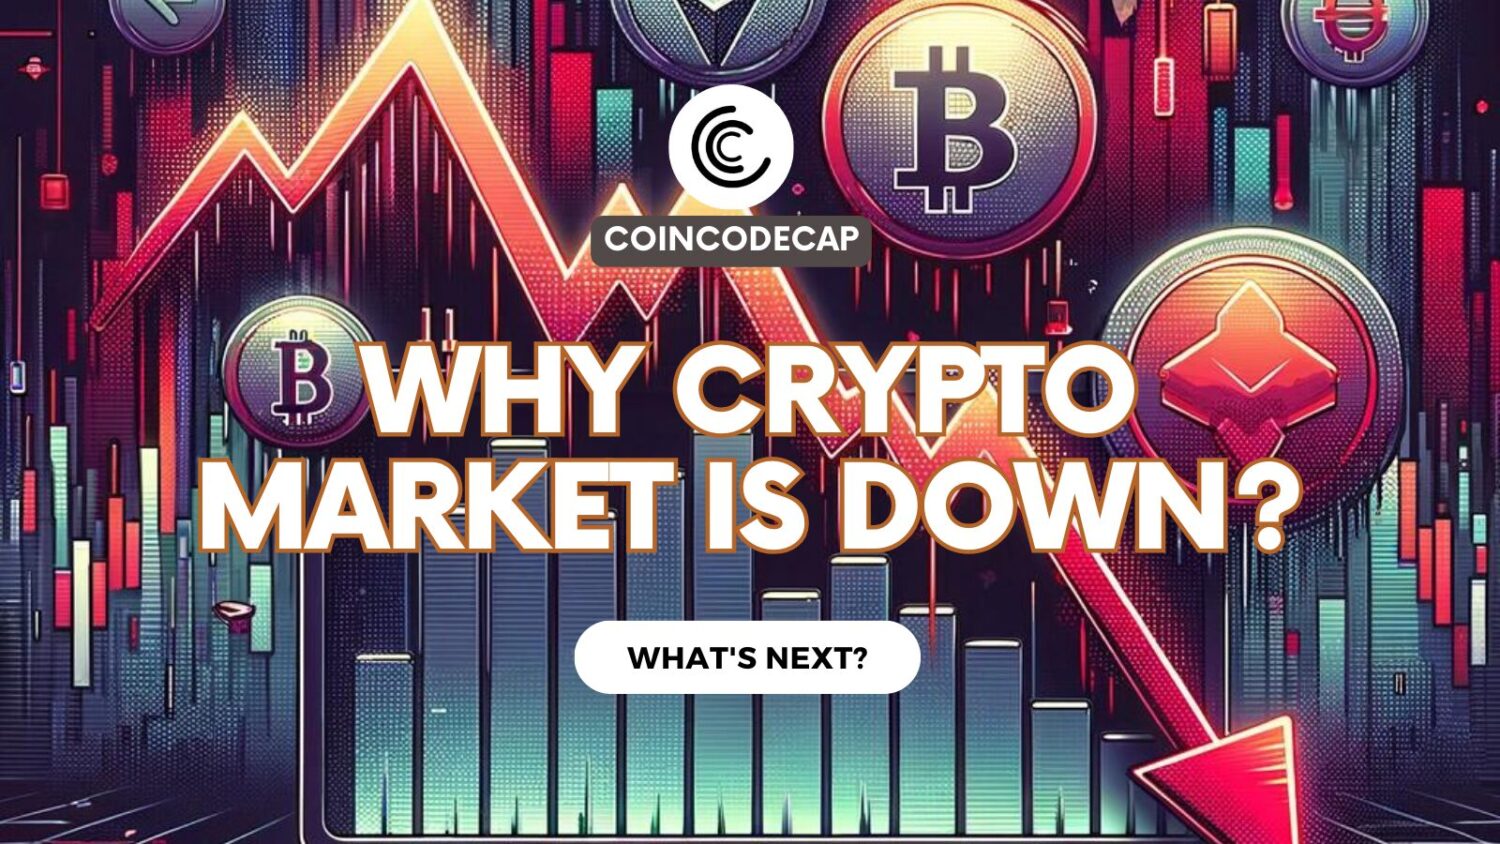 Why Crypto Market Is Down